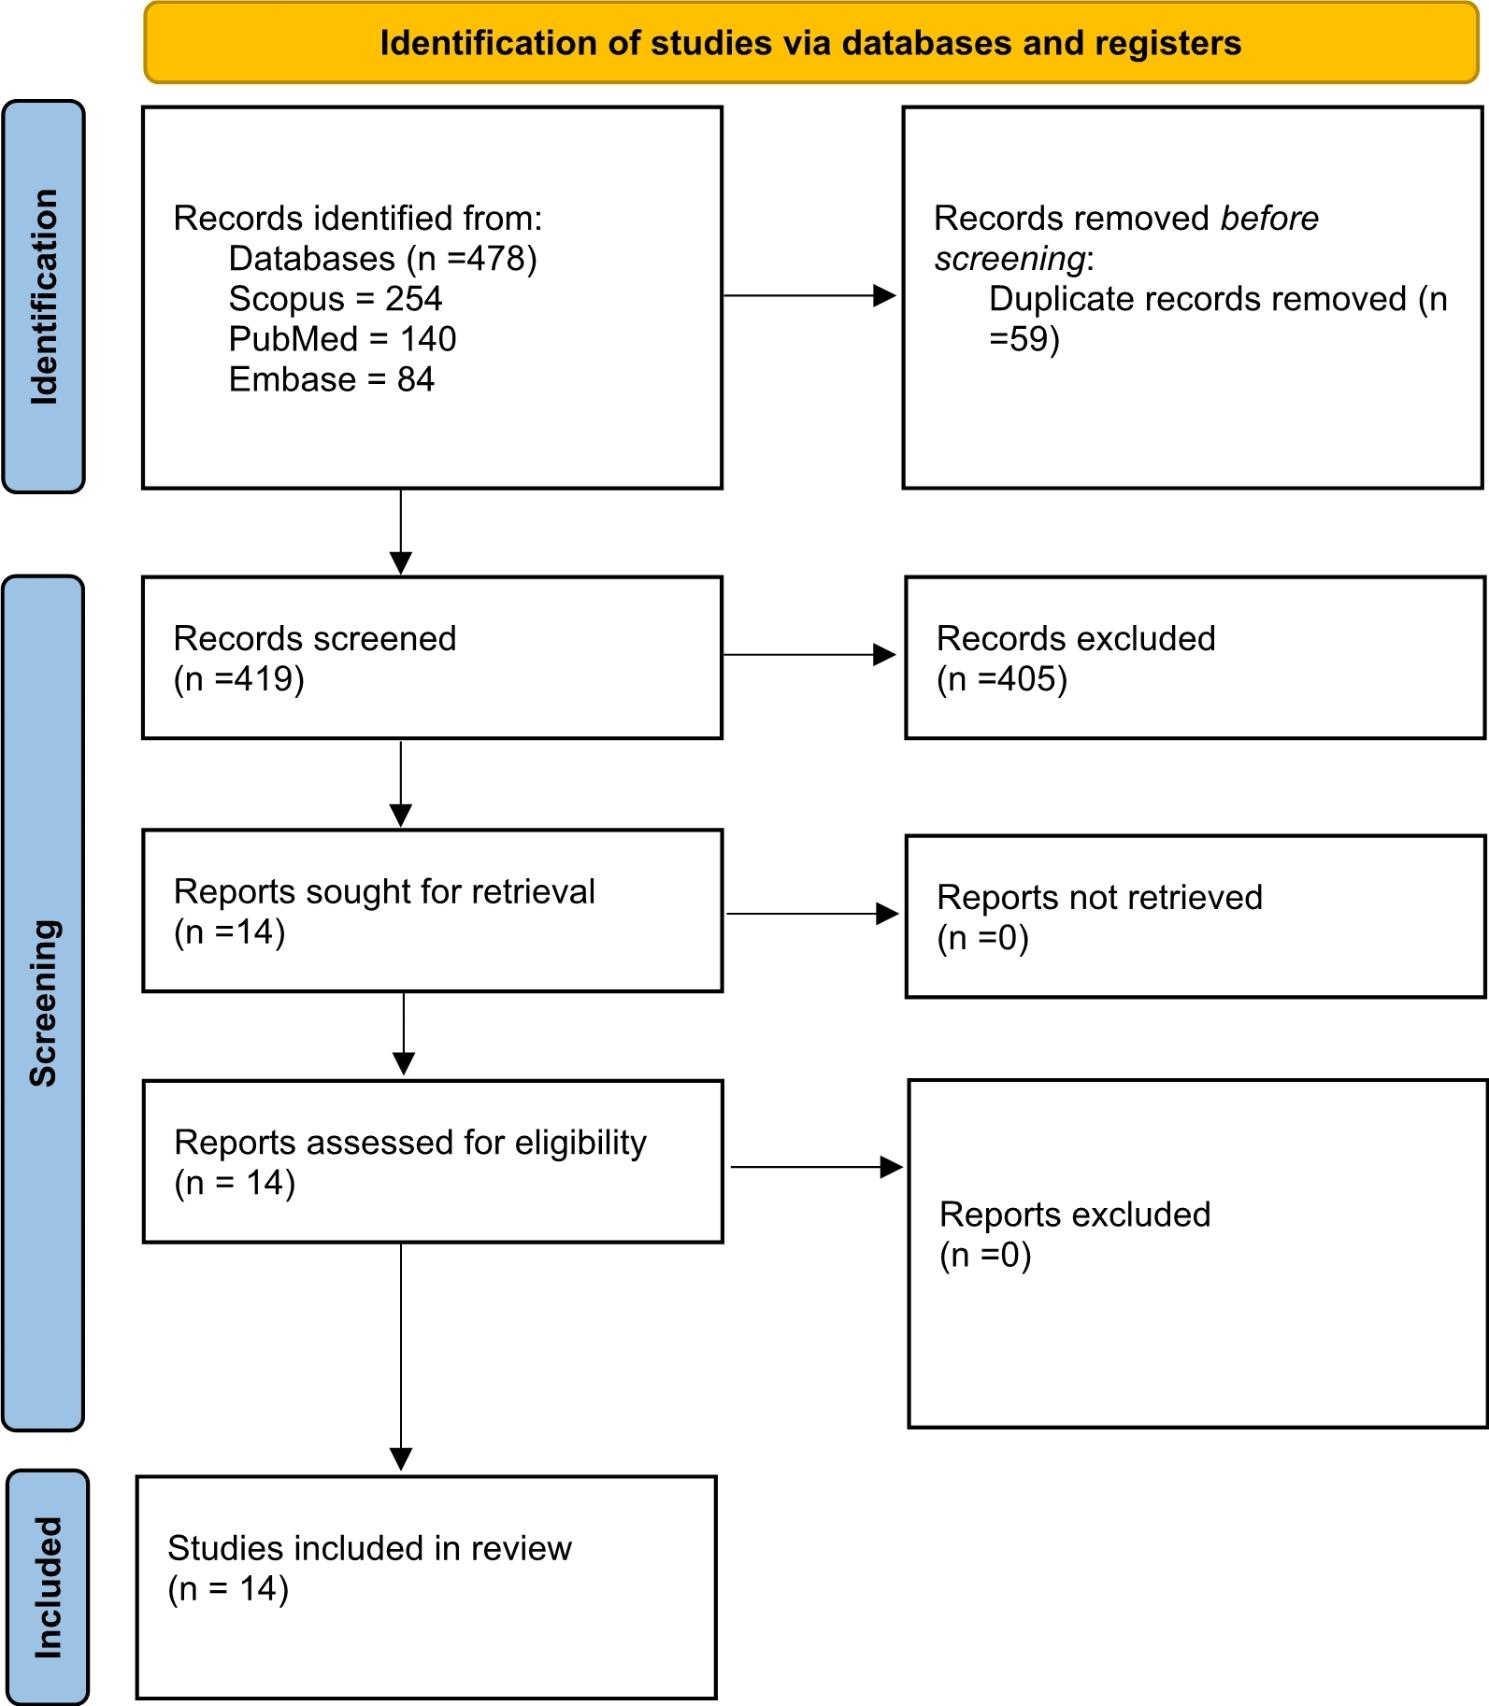 Clinical characteristics and outcomes of patients with TSH-secreting pituitary adenoma and Graves’ disease - a case report and systematic review